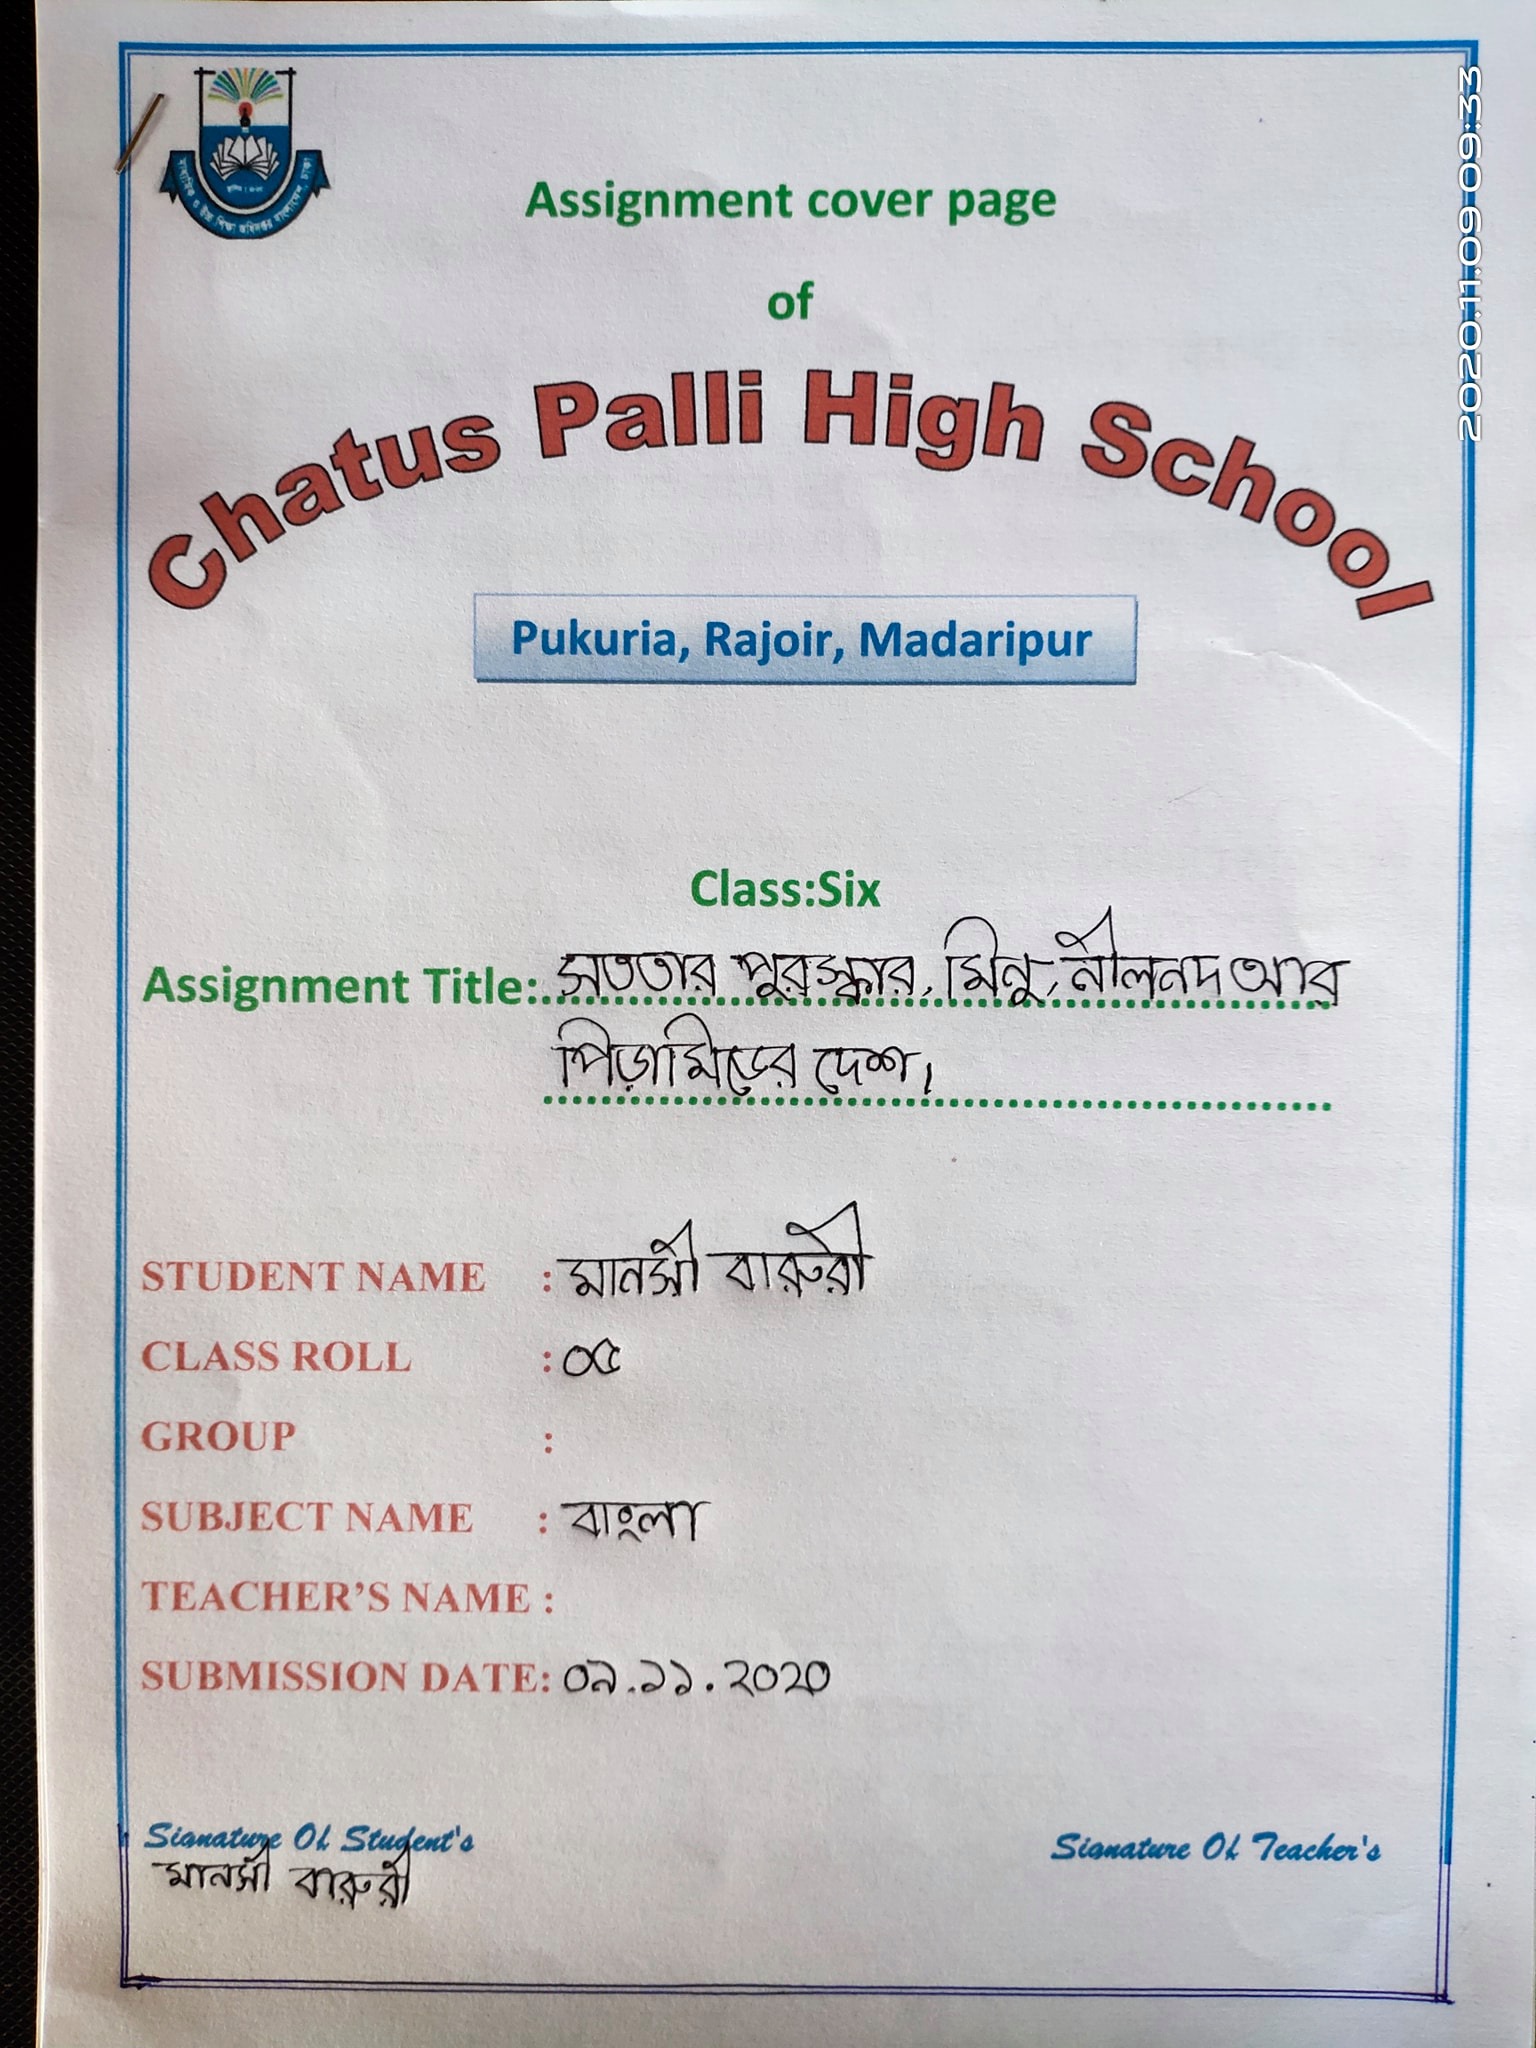 image of assignment cover